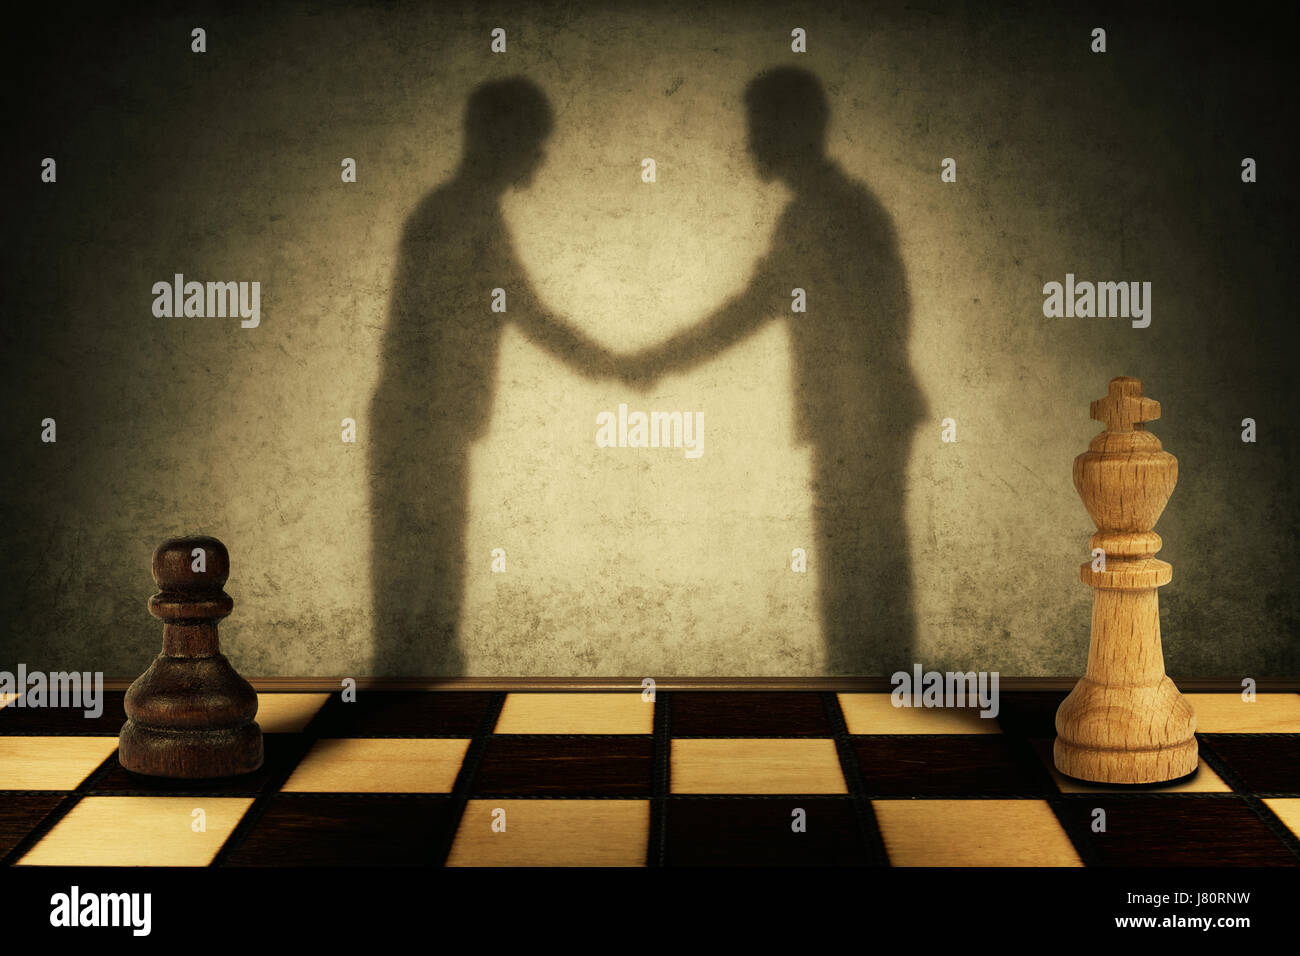 Chess pawn and king standing in front one another with their shadow transform into businessman giving handshake. Business hierarchy levels peace conce Stock Photo